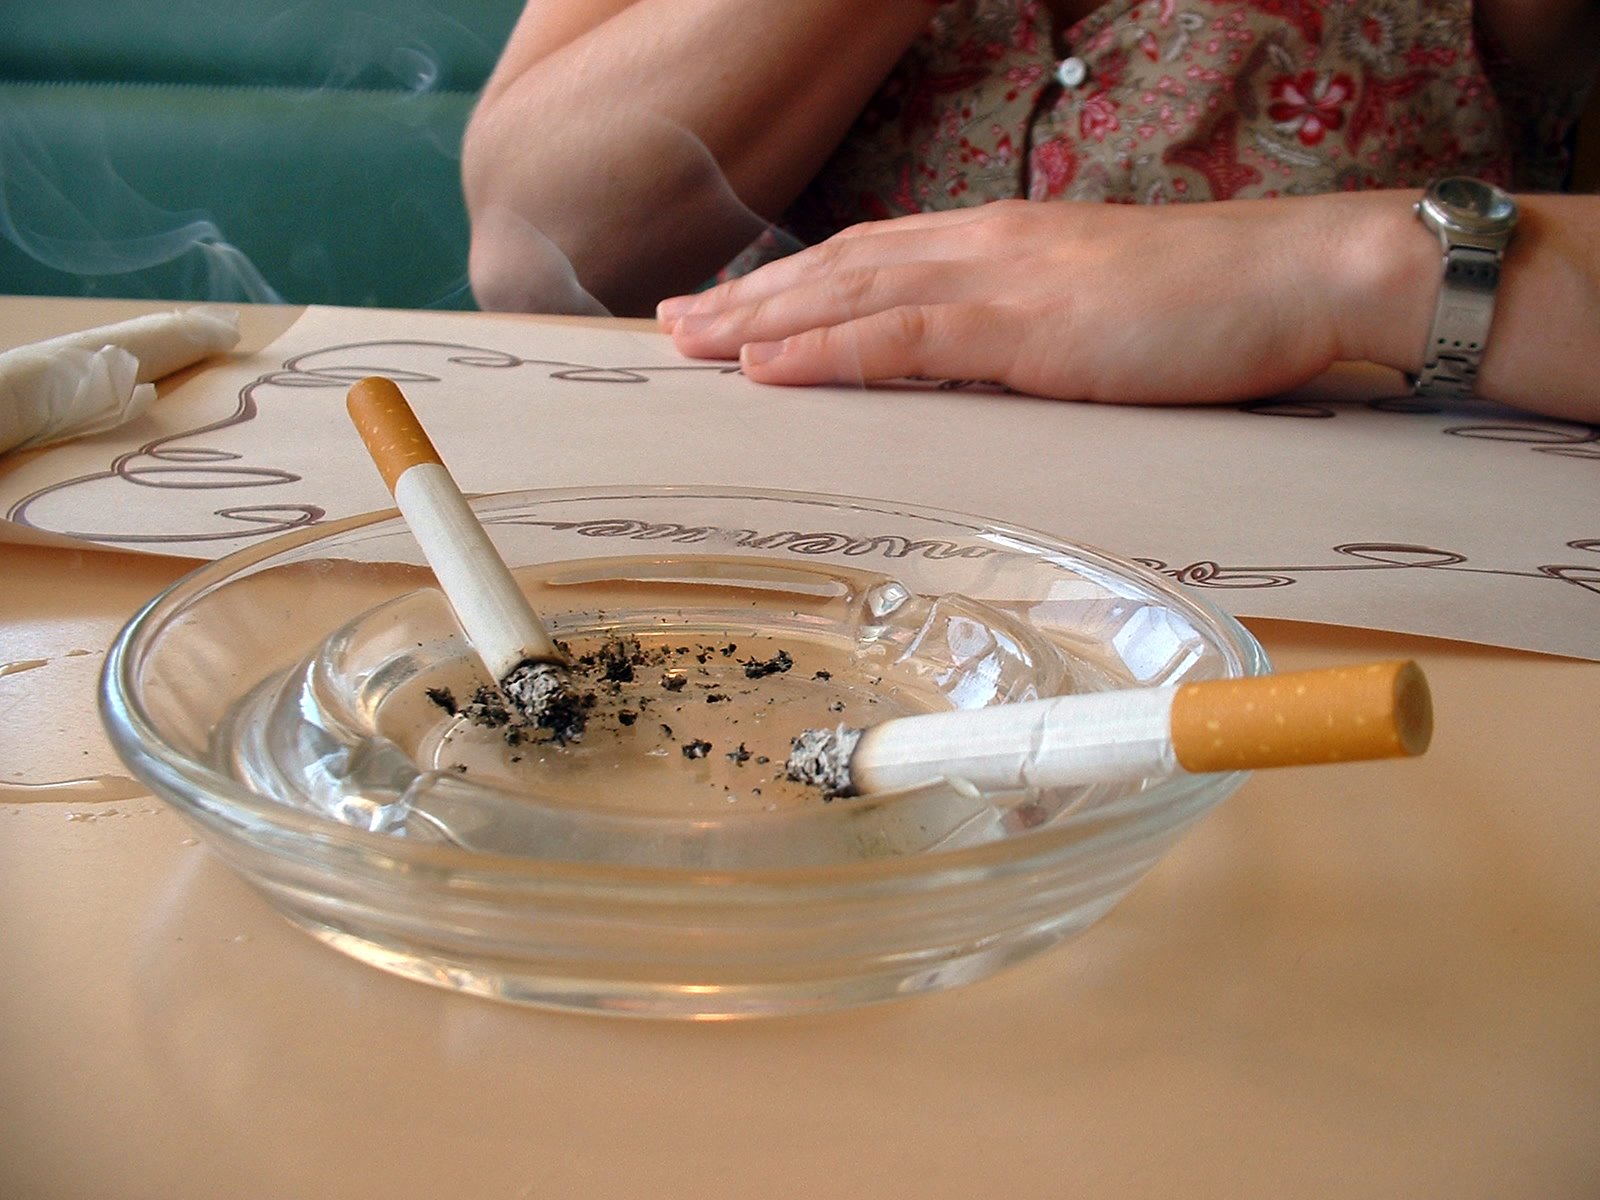 a woman smoking cigarettes and a glass bowl of ashtrays